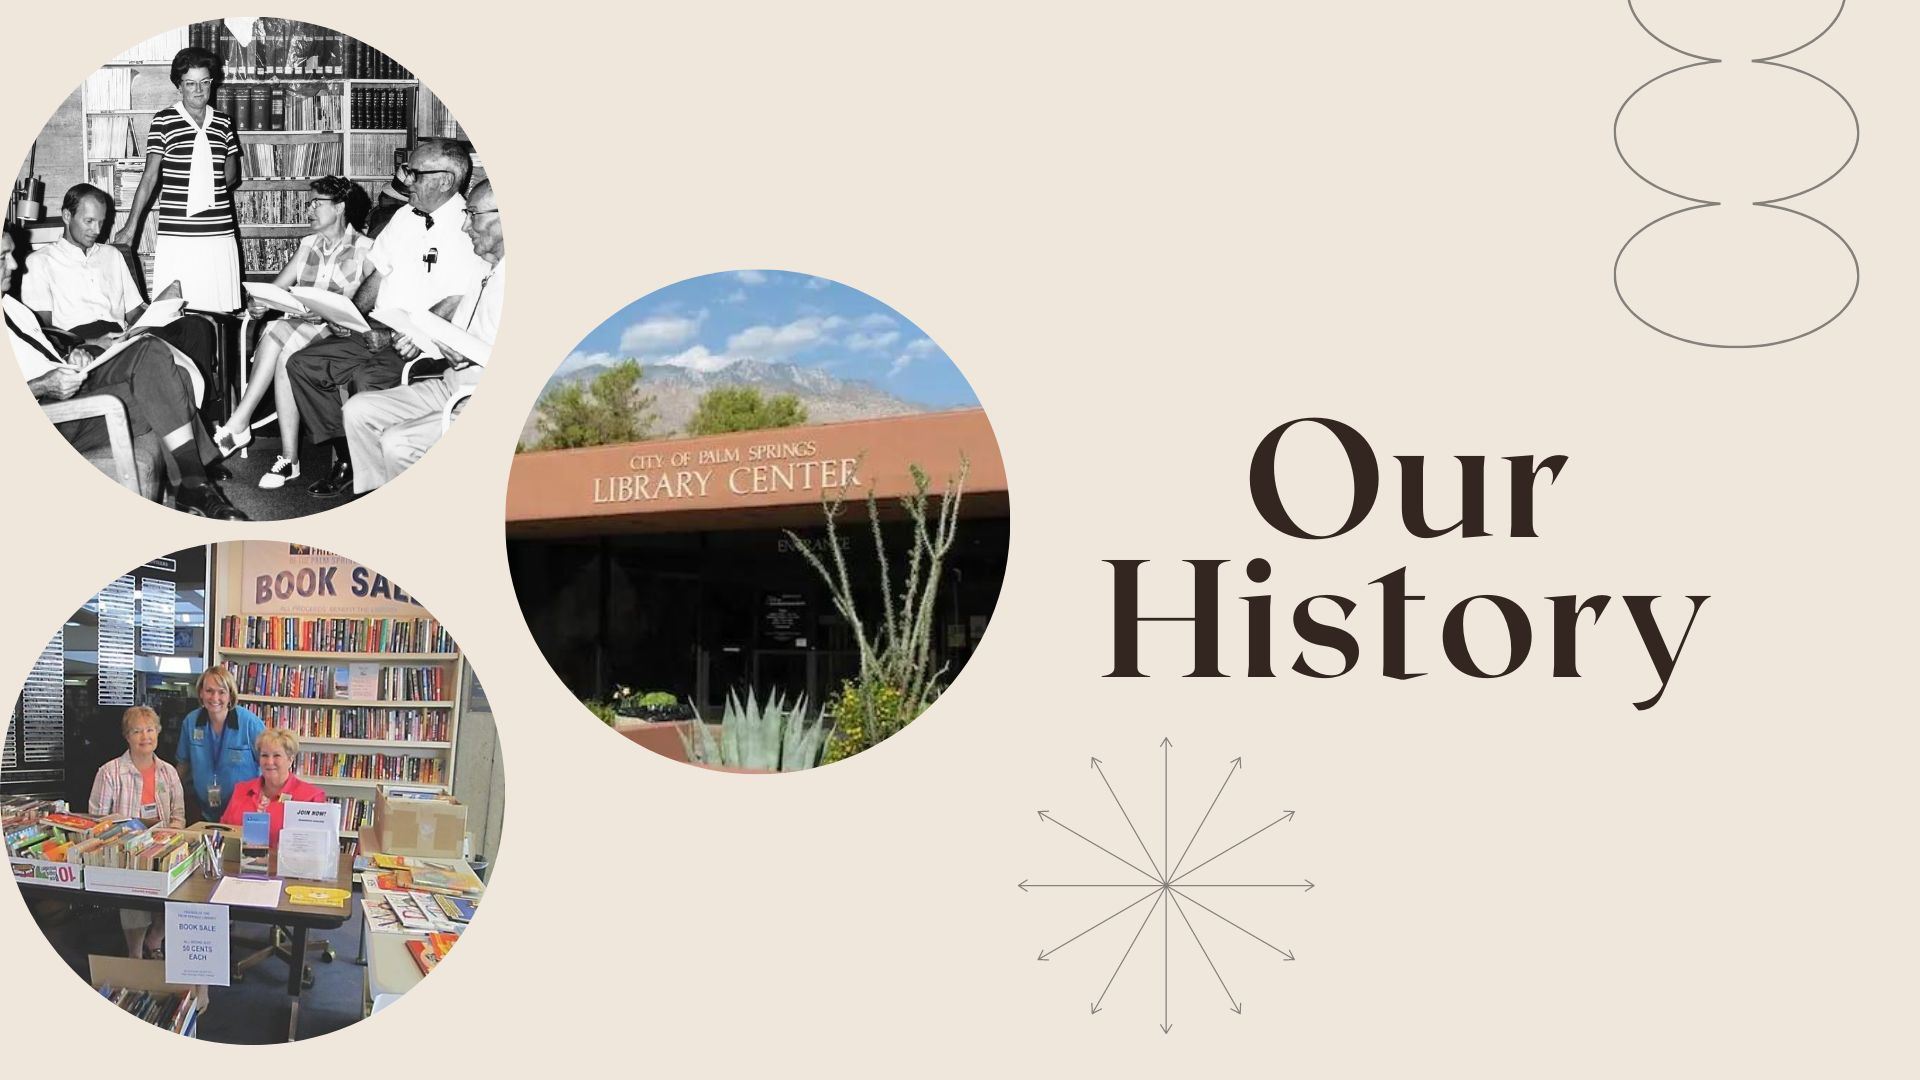 Our History.  Image of founding members of the friends of the palm springs library. Image of current members of friends of the palm springs library.  Image of exterior of palm springs library.